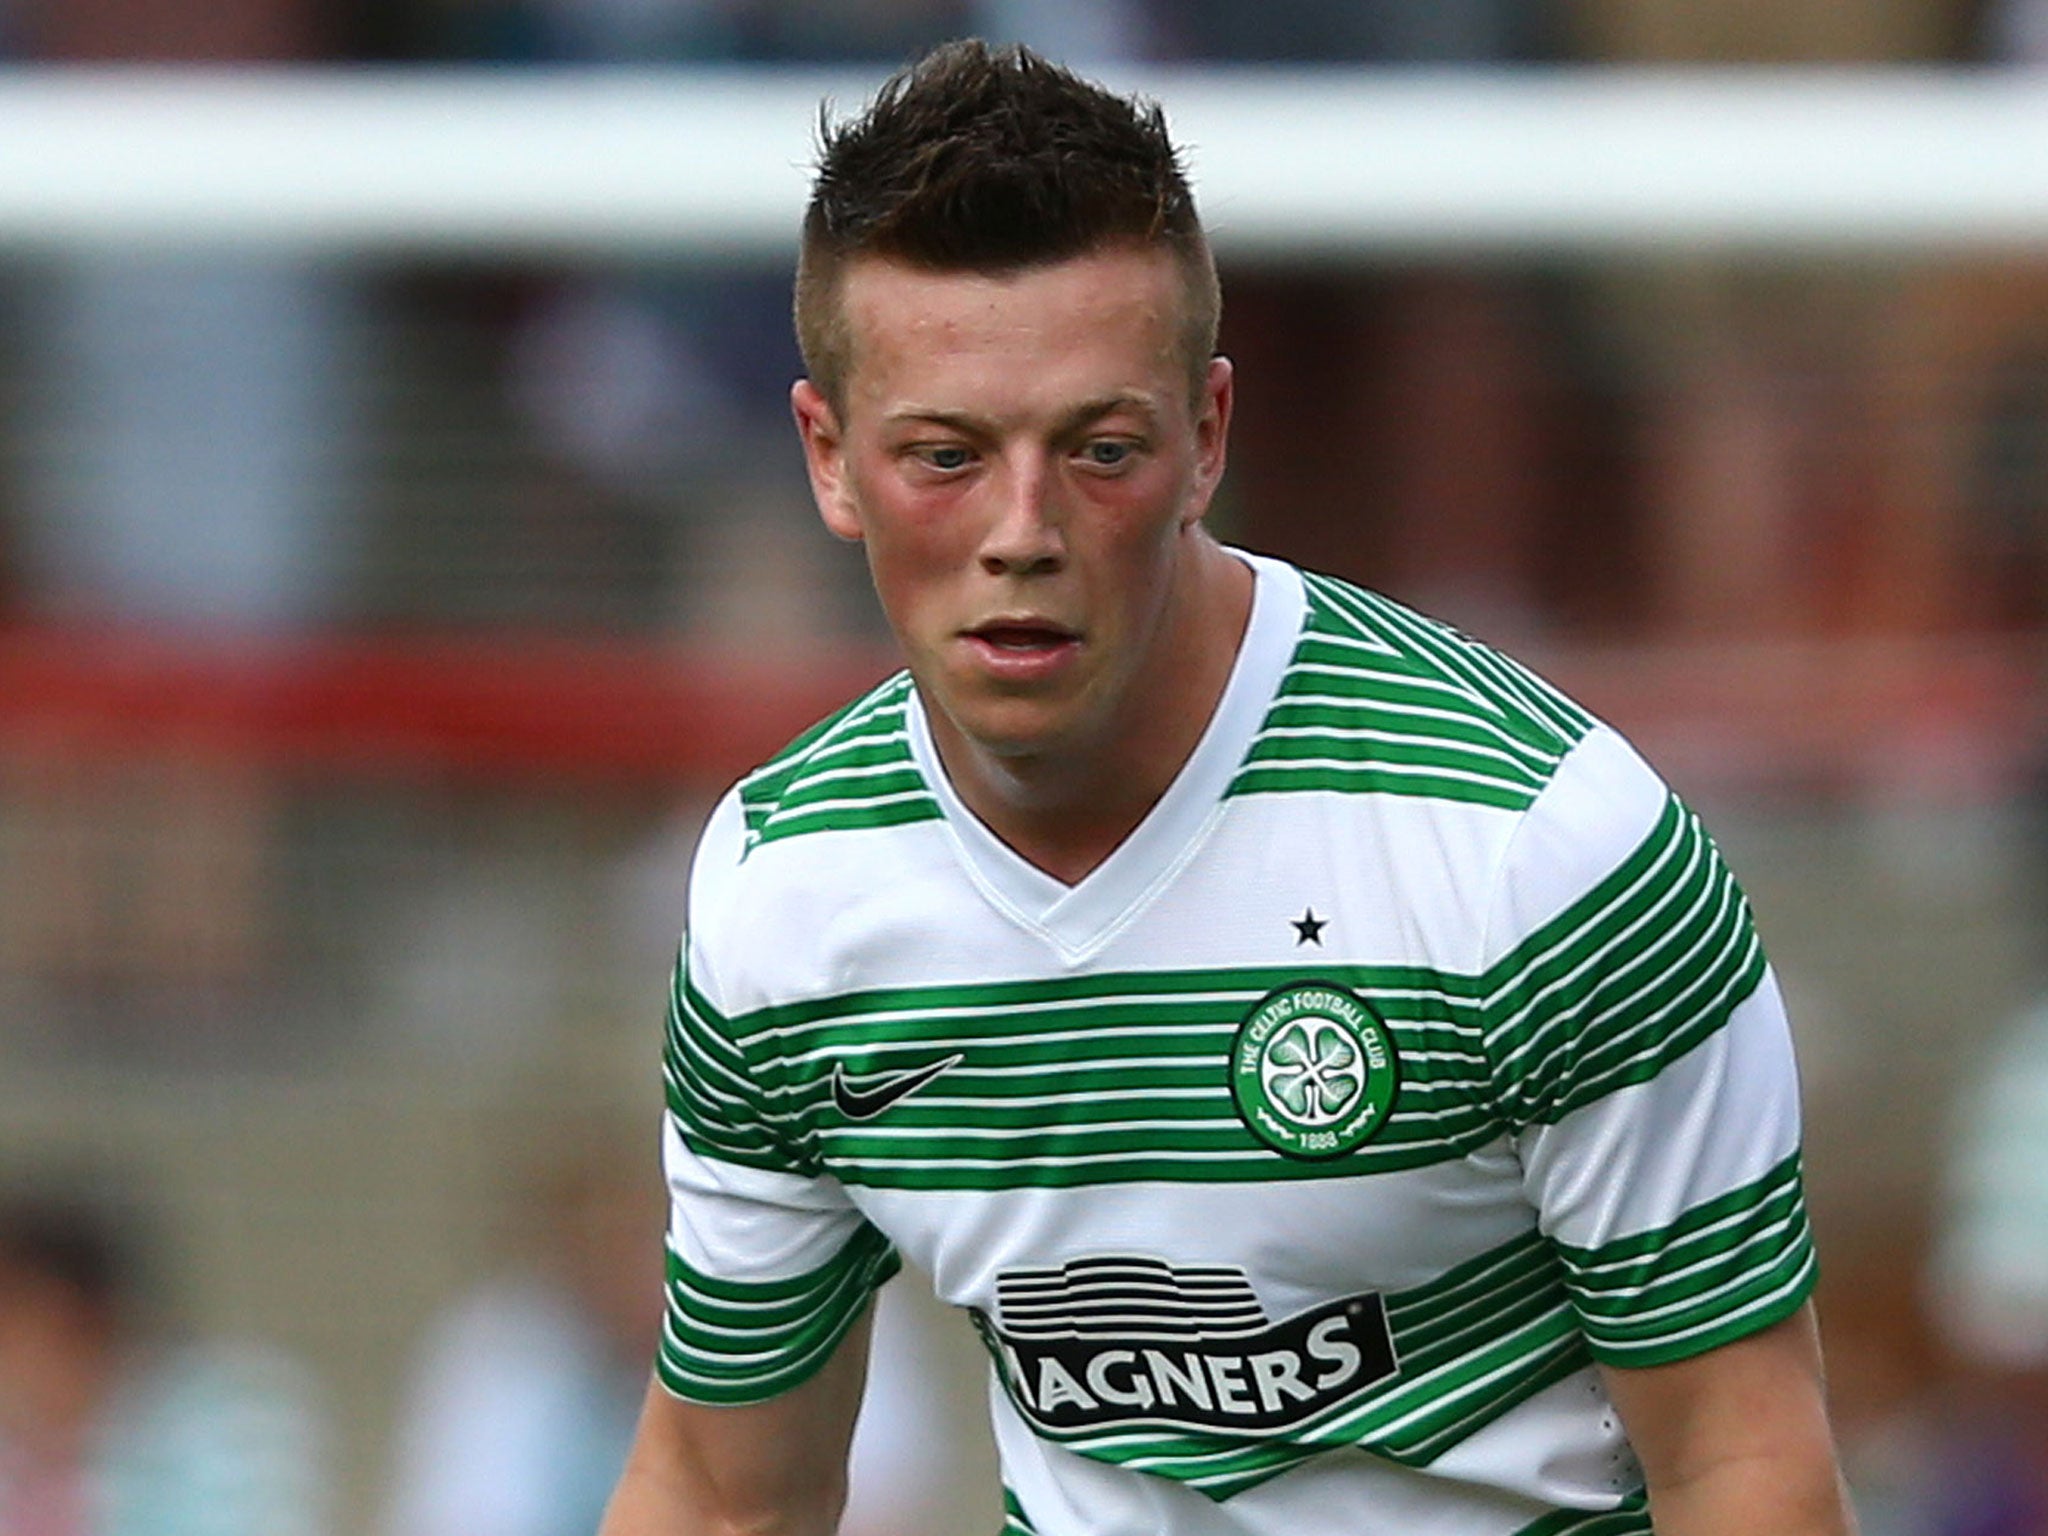 Callum McGregor gave Celtic victory in their Champions League 1-0 victory over KR Reykjavik